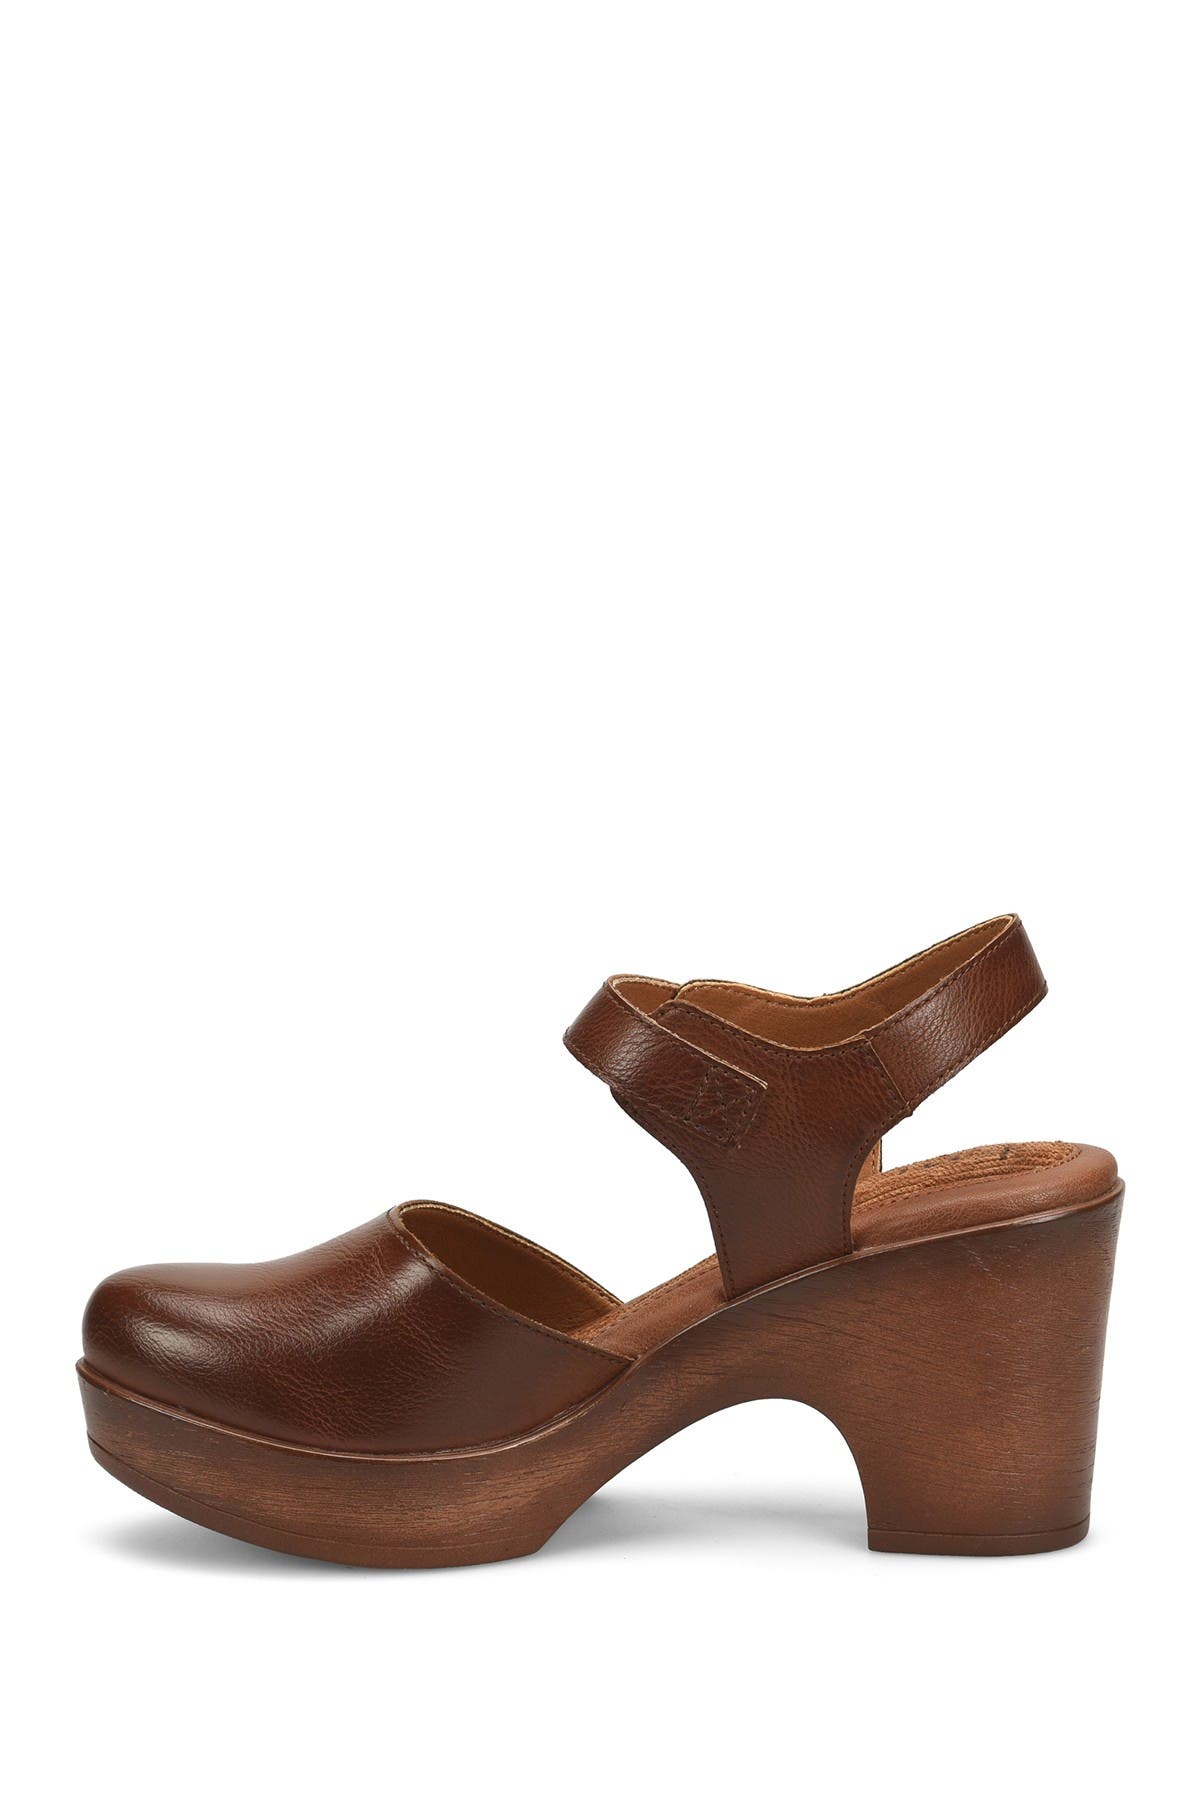 Embracing Comfort and Versatility: Allure of Women’s Clog Shoes